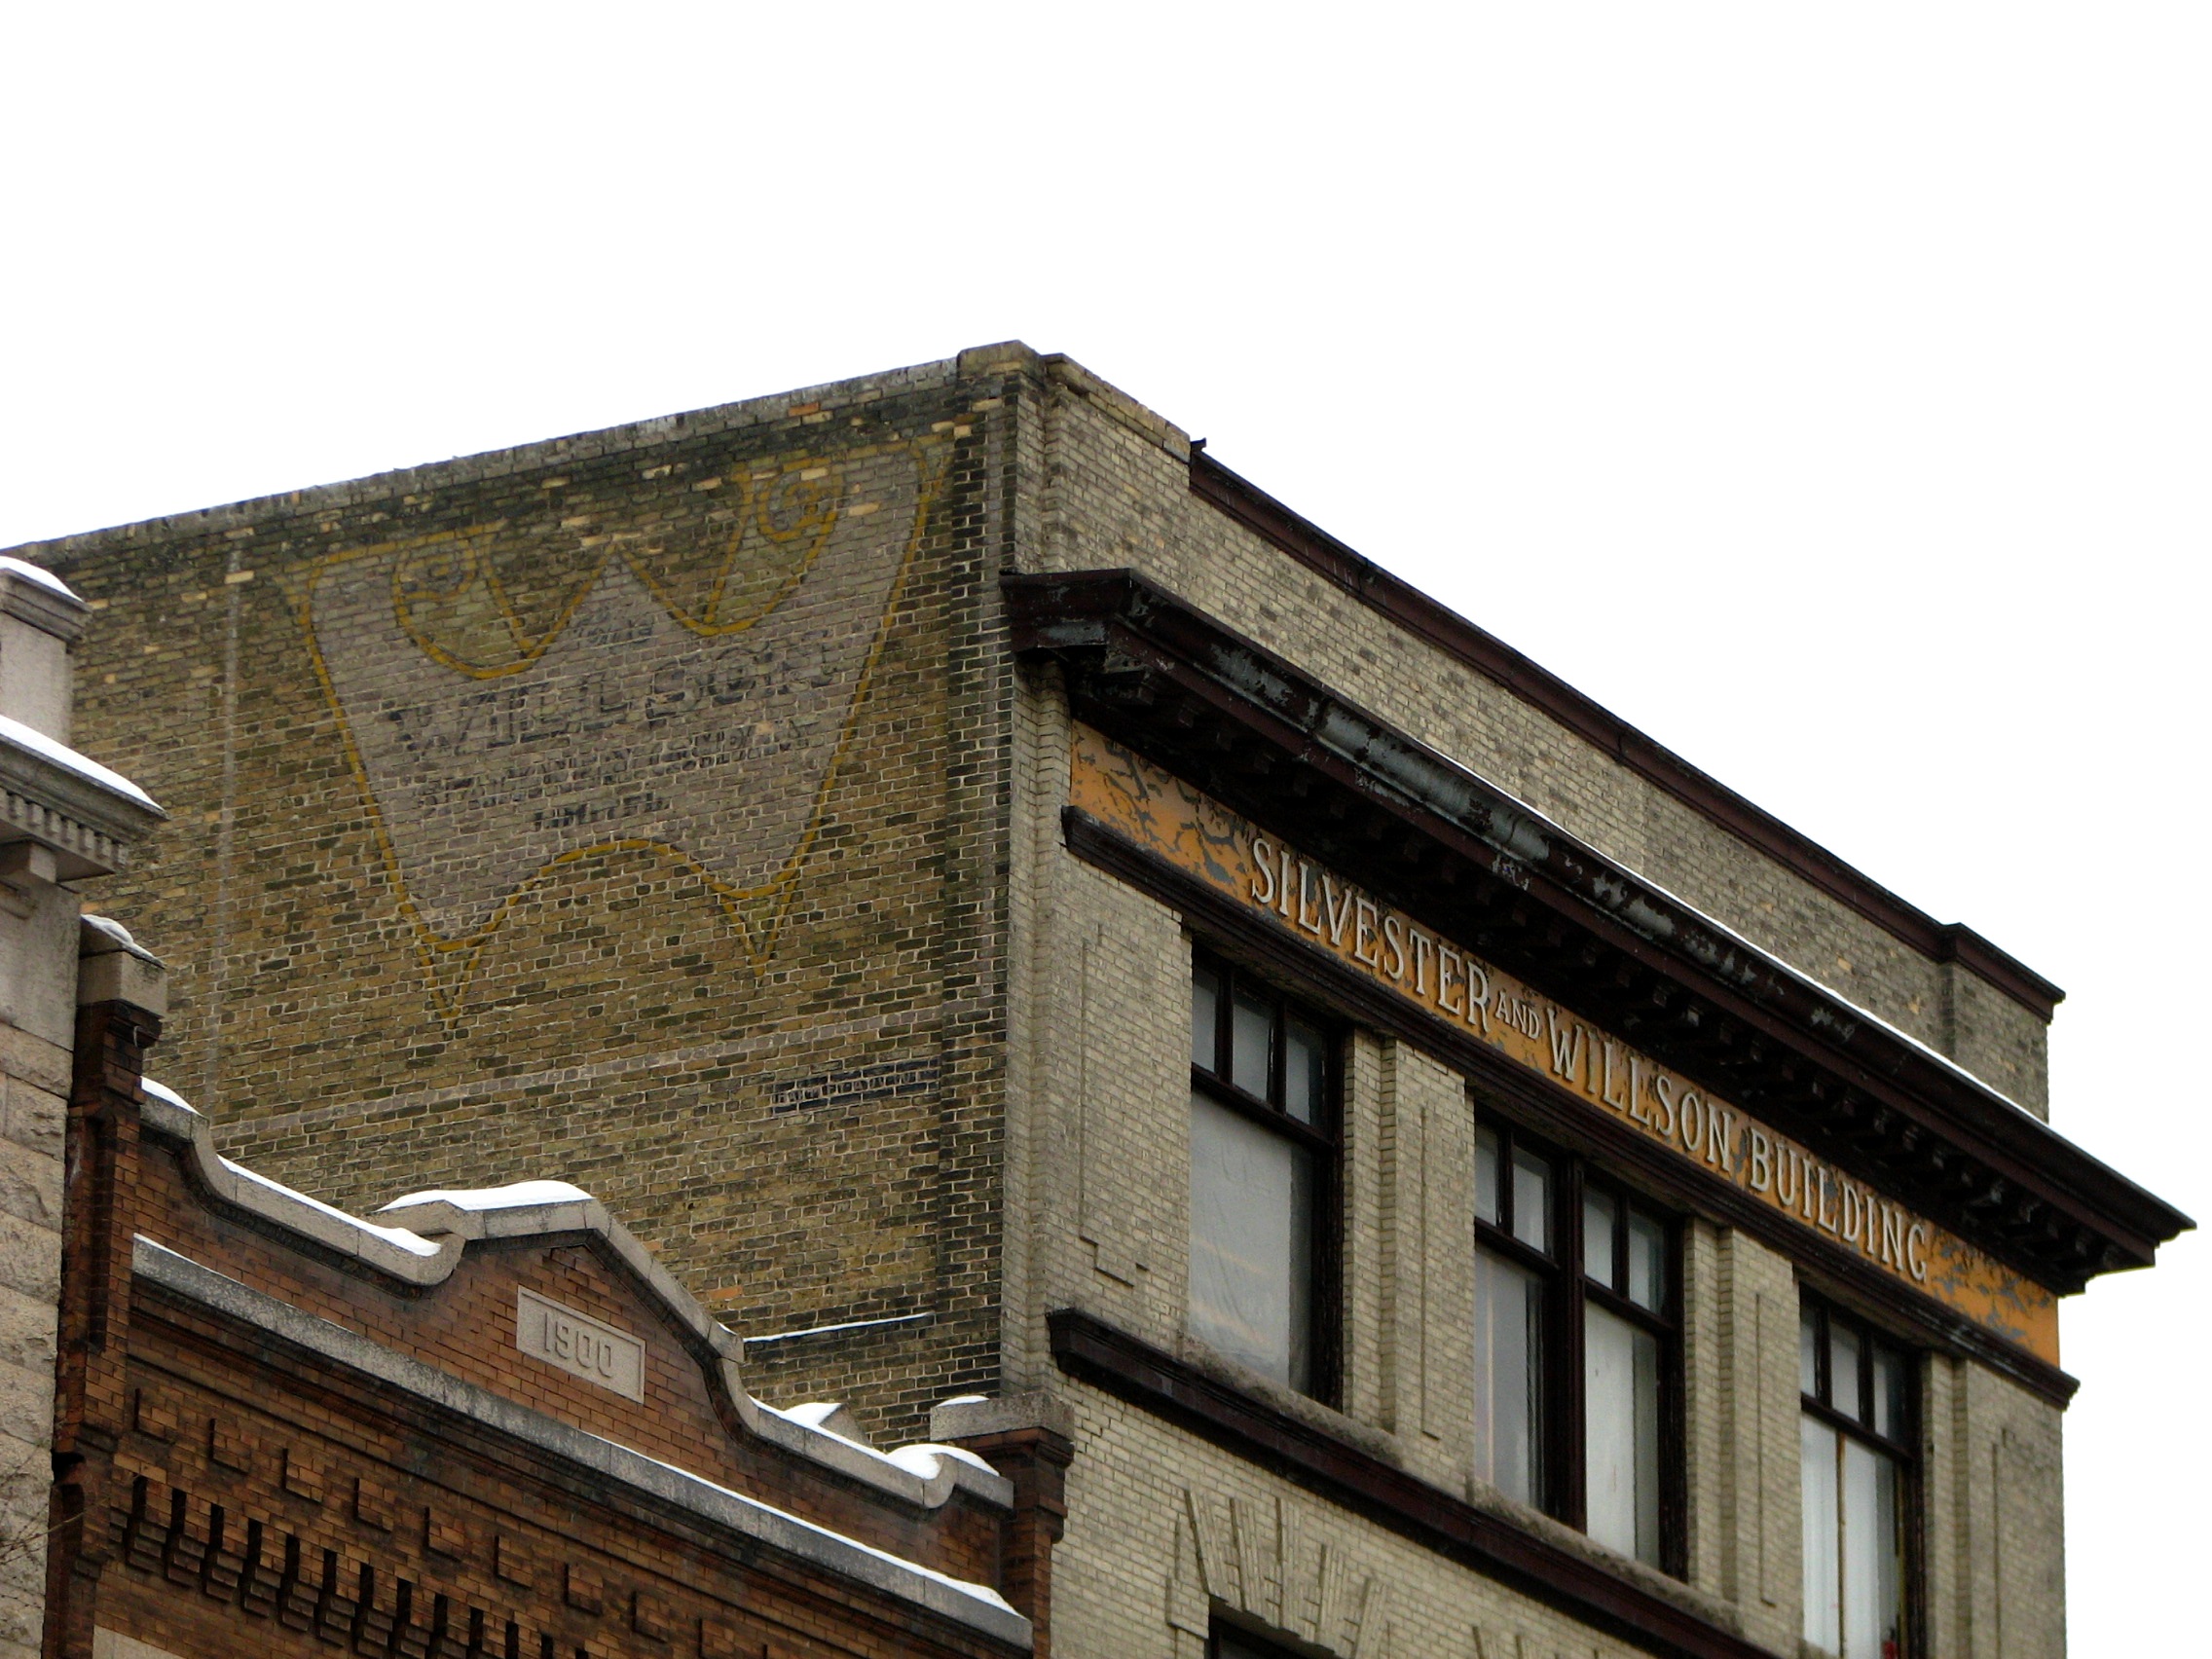 Close-up photo of the Wilson Stationary ghost sign at 222 McDermot Avenue